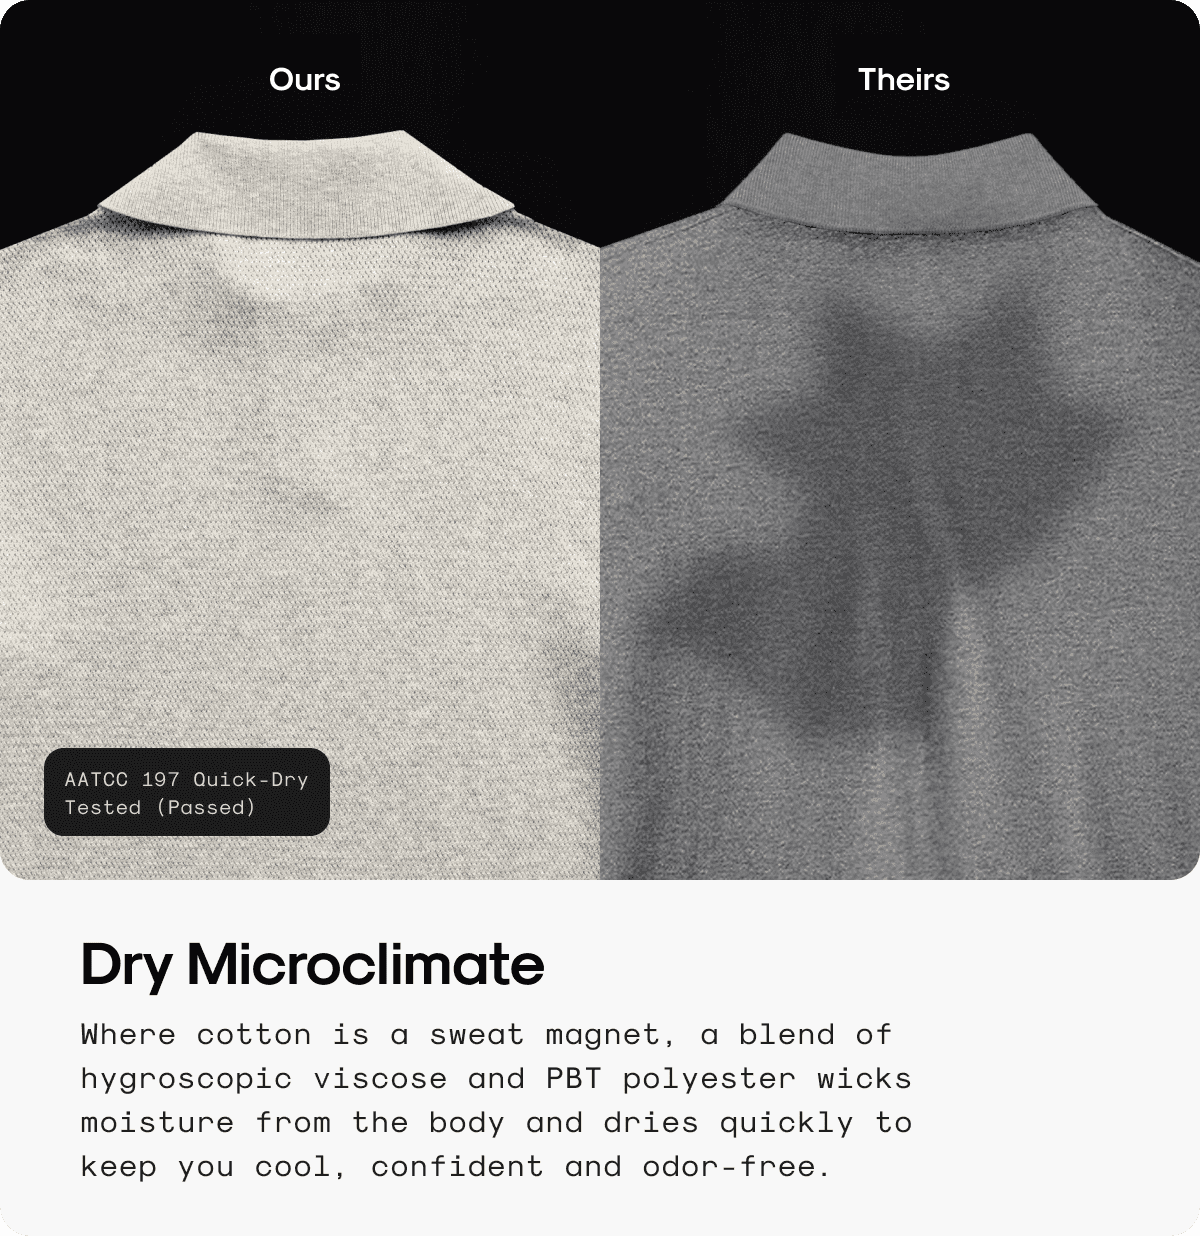 Dry Microclimate